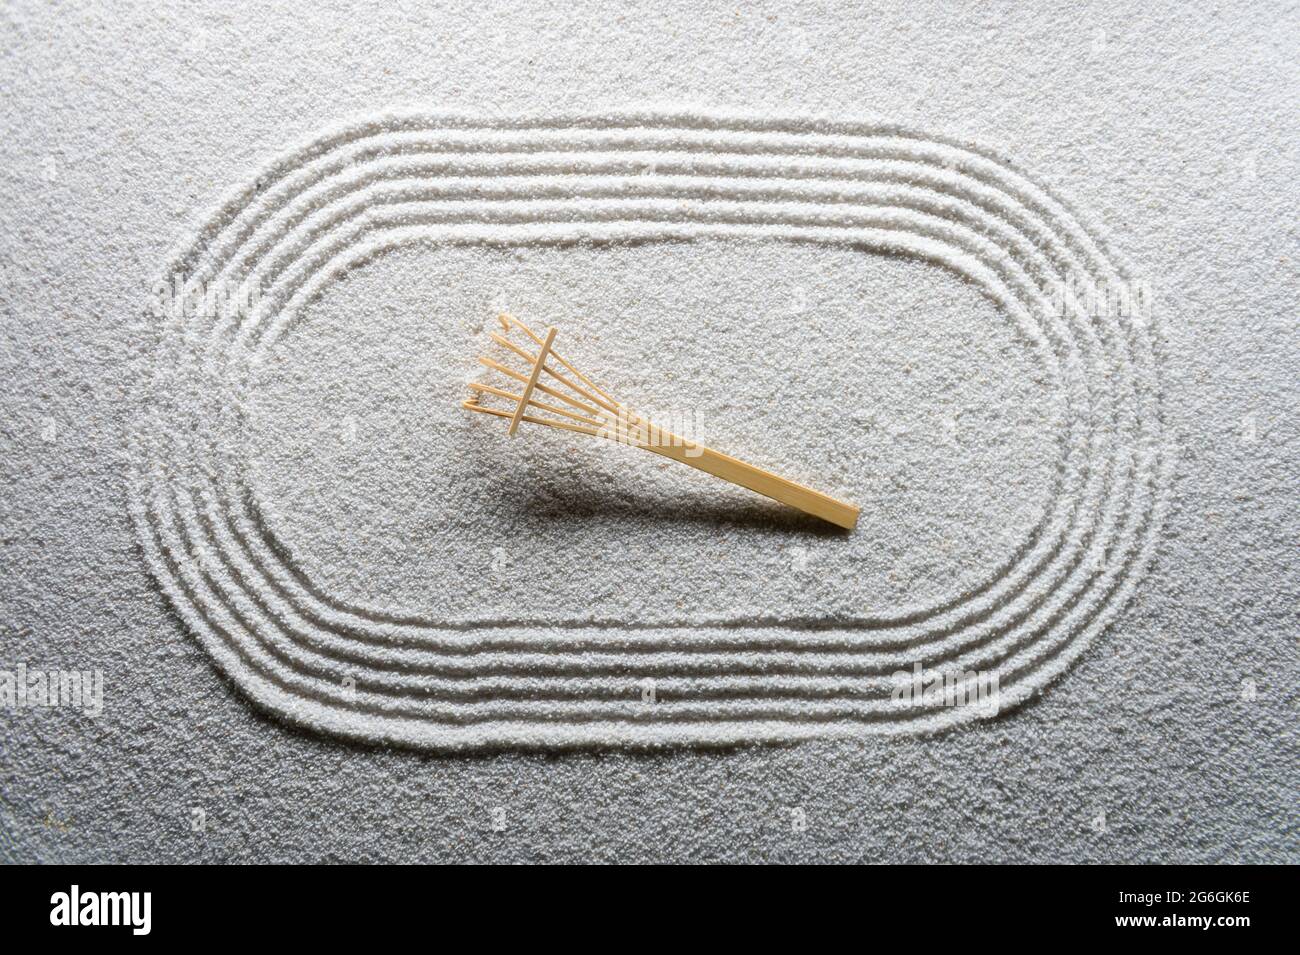 Small wooden rake sits on Japanese Zen garden raked with a simple sports running track oval in textured white sand Stock Photo